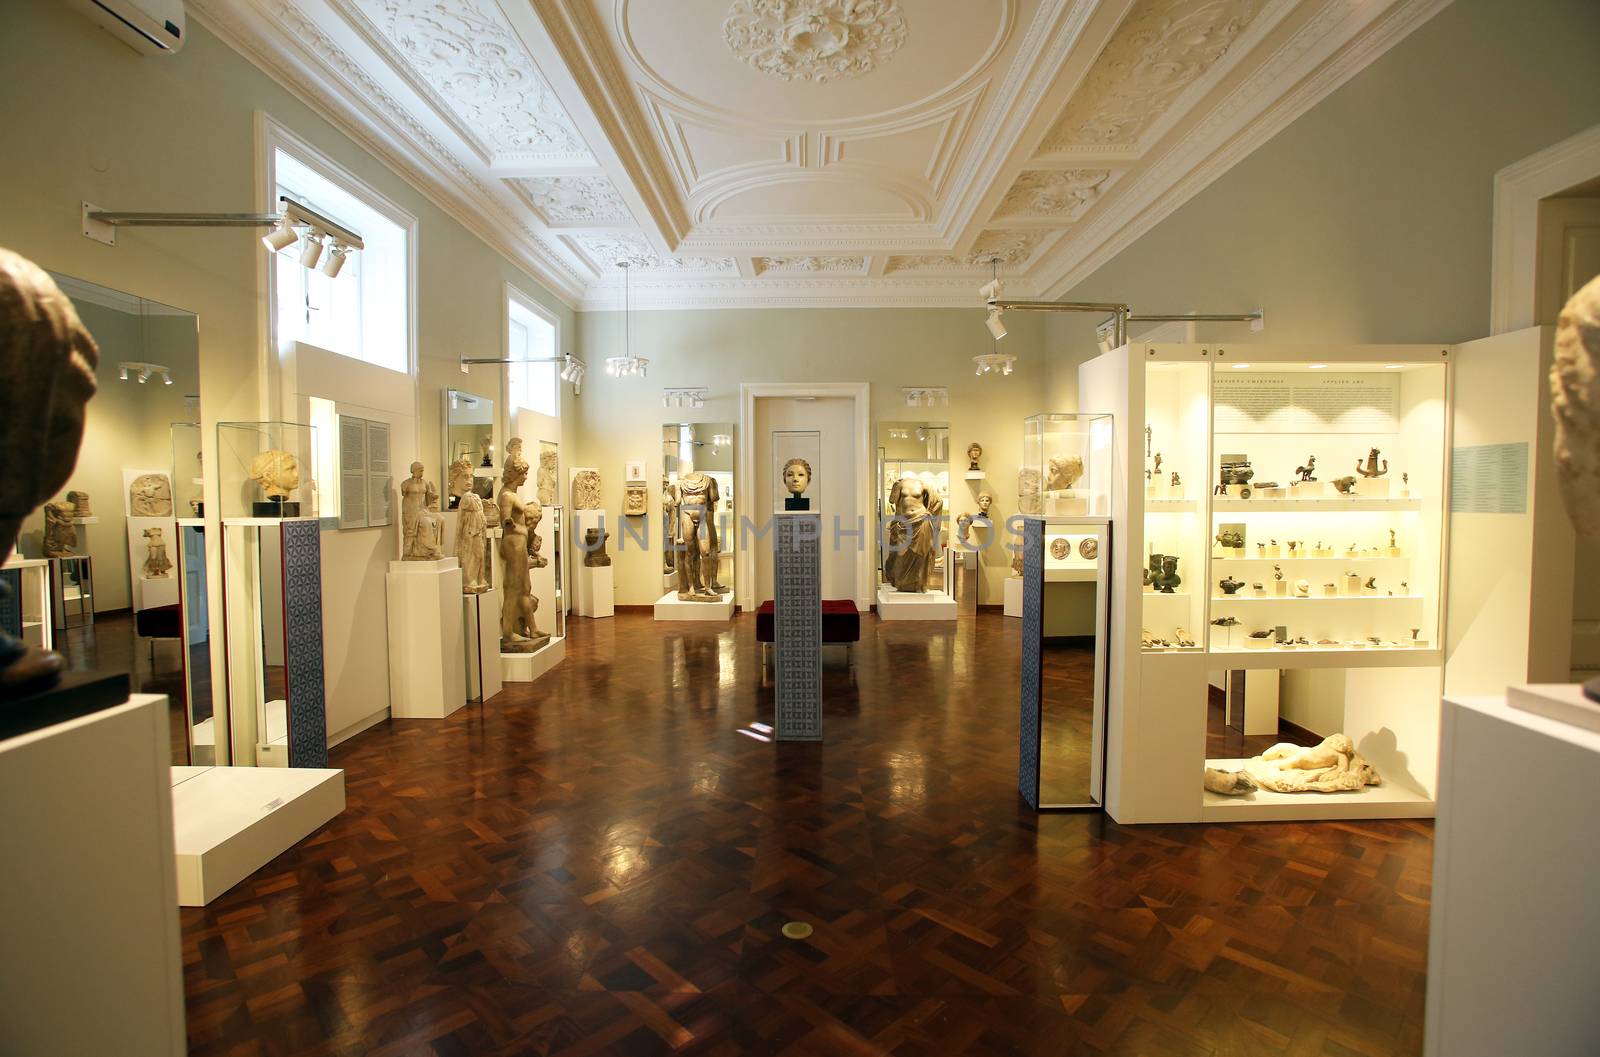 Archaeological Museum in Zagreb, Croatia on September 23, 2014